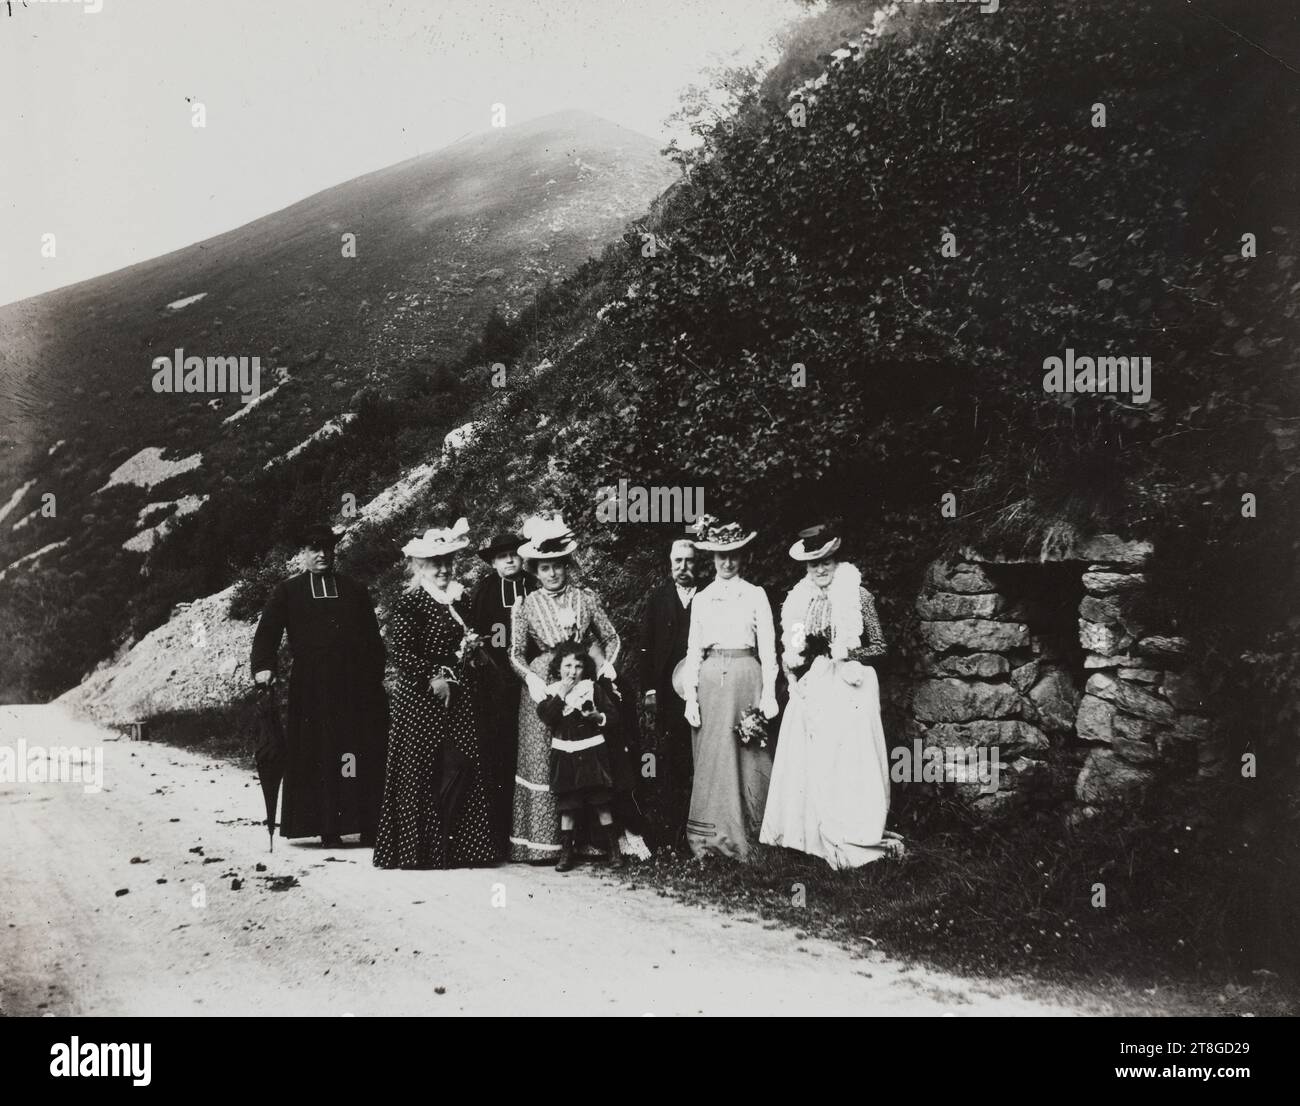 Four women, two priests, a man and a child, Photographer, 1st quarter 20th century, Photograph, Silver, black & white print, Dimensions - Work: Height: 8.7 cm, Width: 11 cm Stock Photo